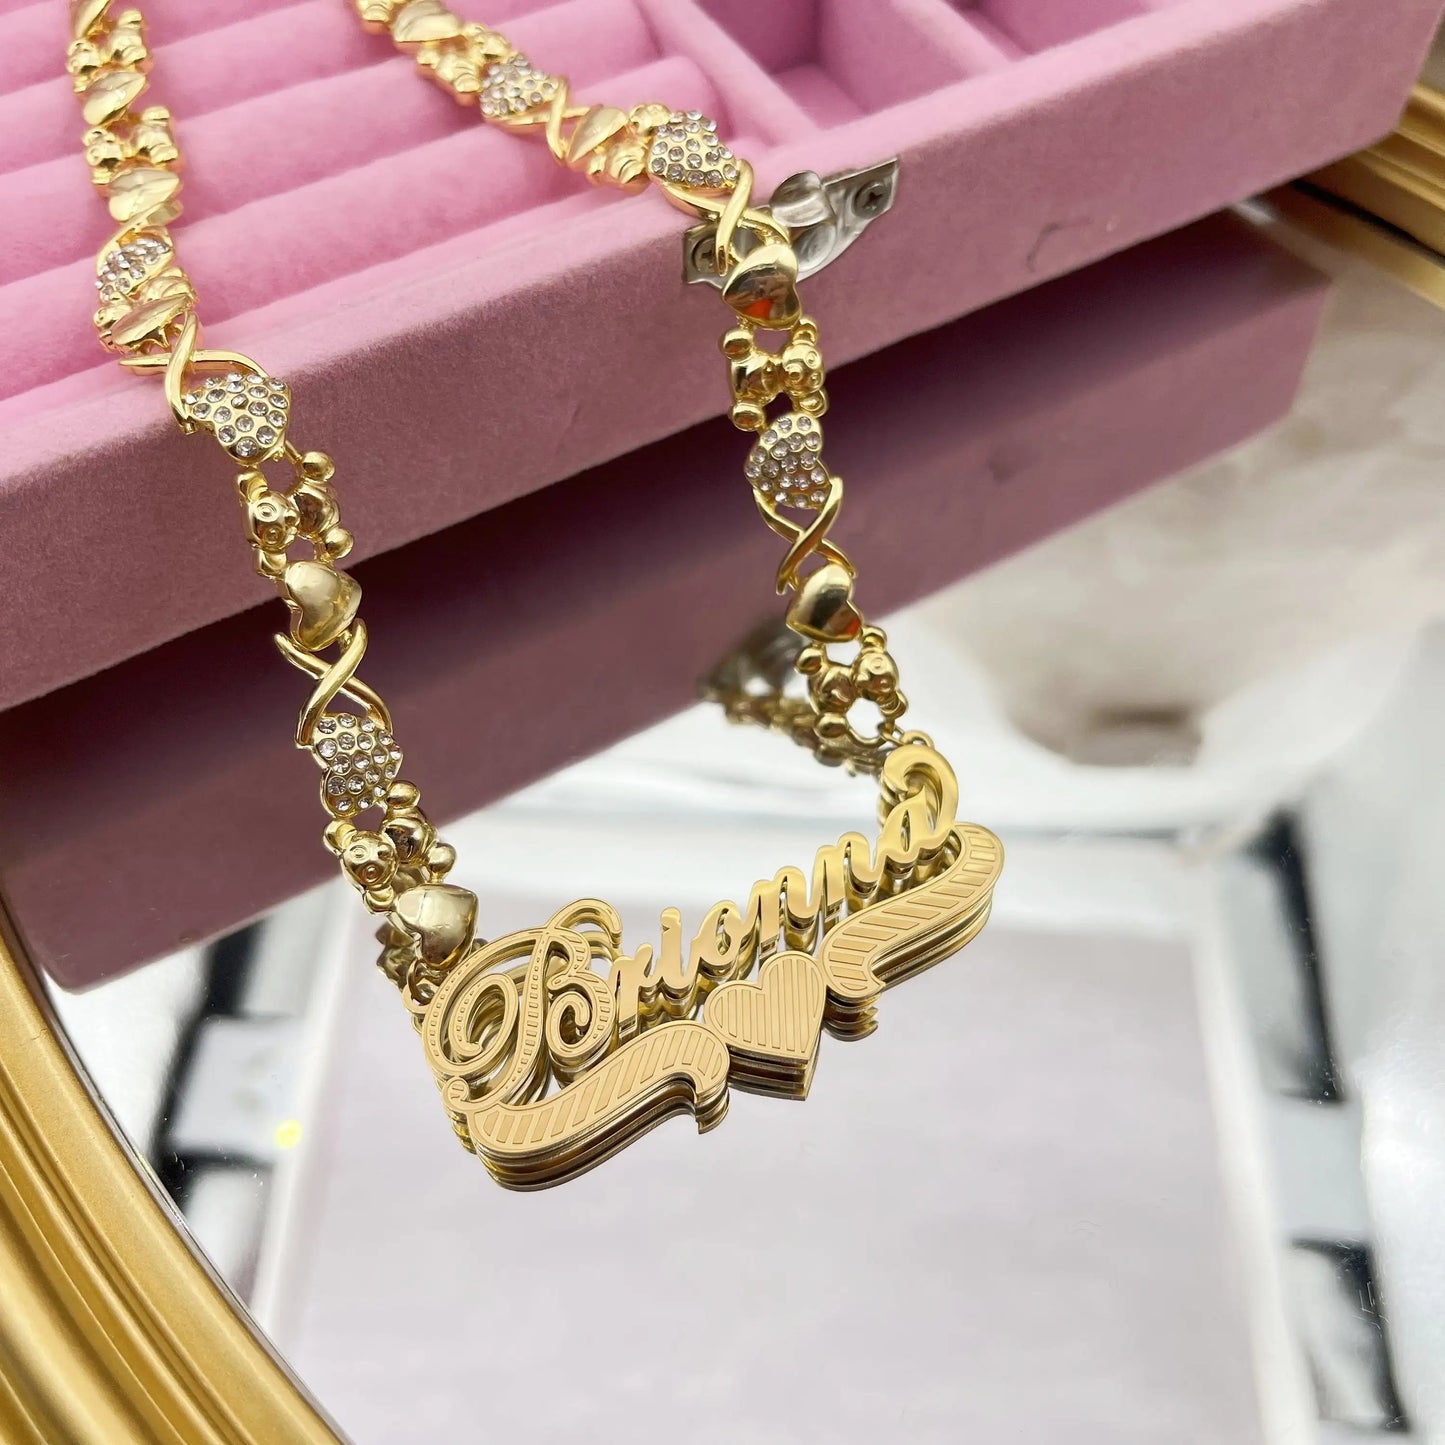 3D Double Plated Name Necklace Custom Name Necklace with Teddy Bear Personalized Nameplate Pendant Chain Gift For Women Kids